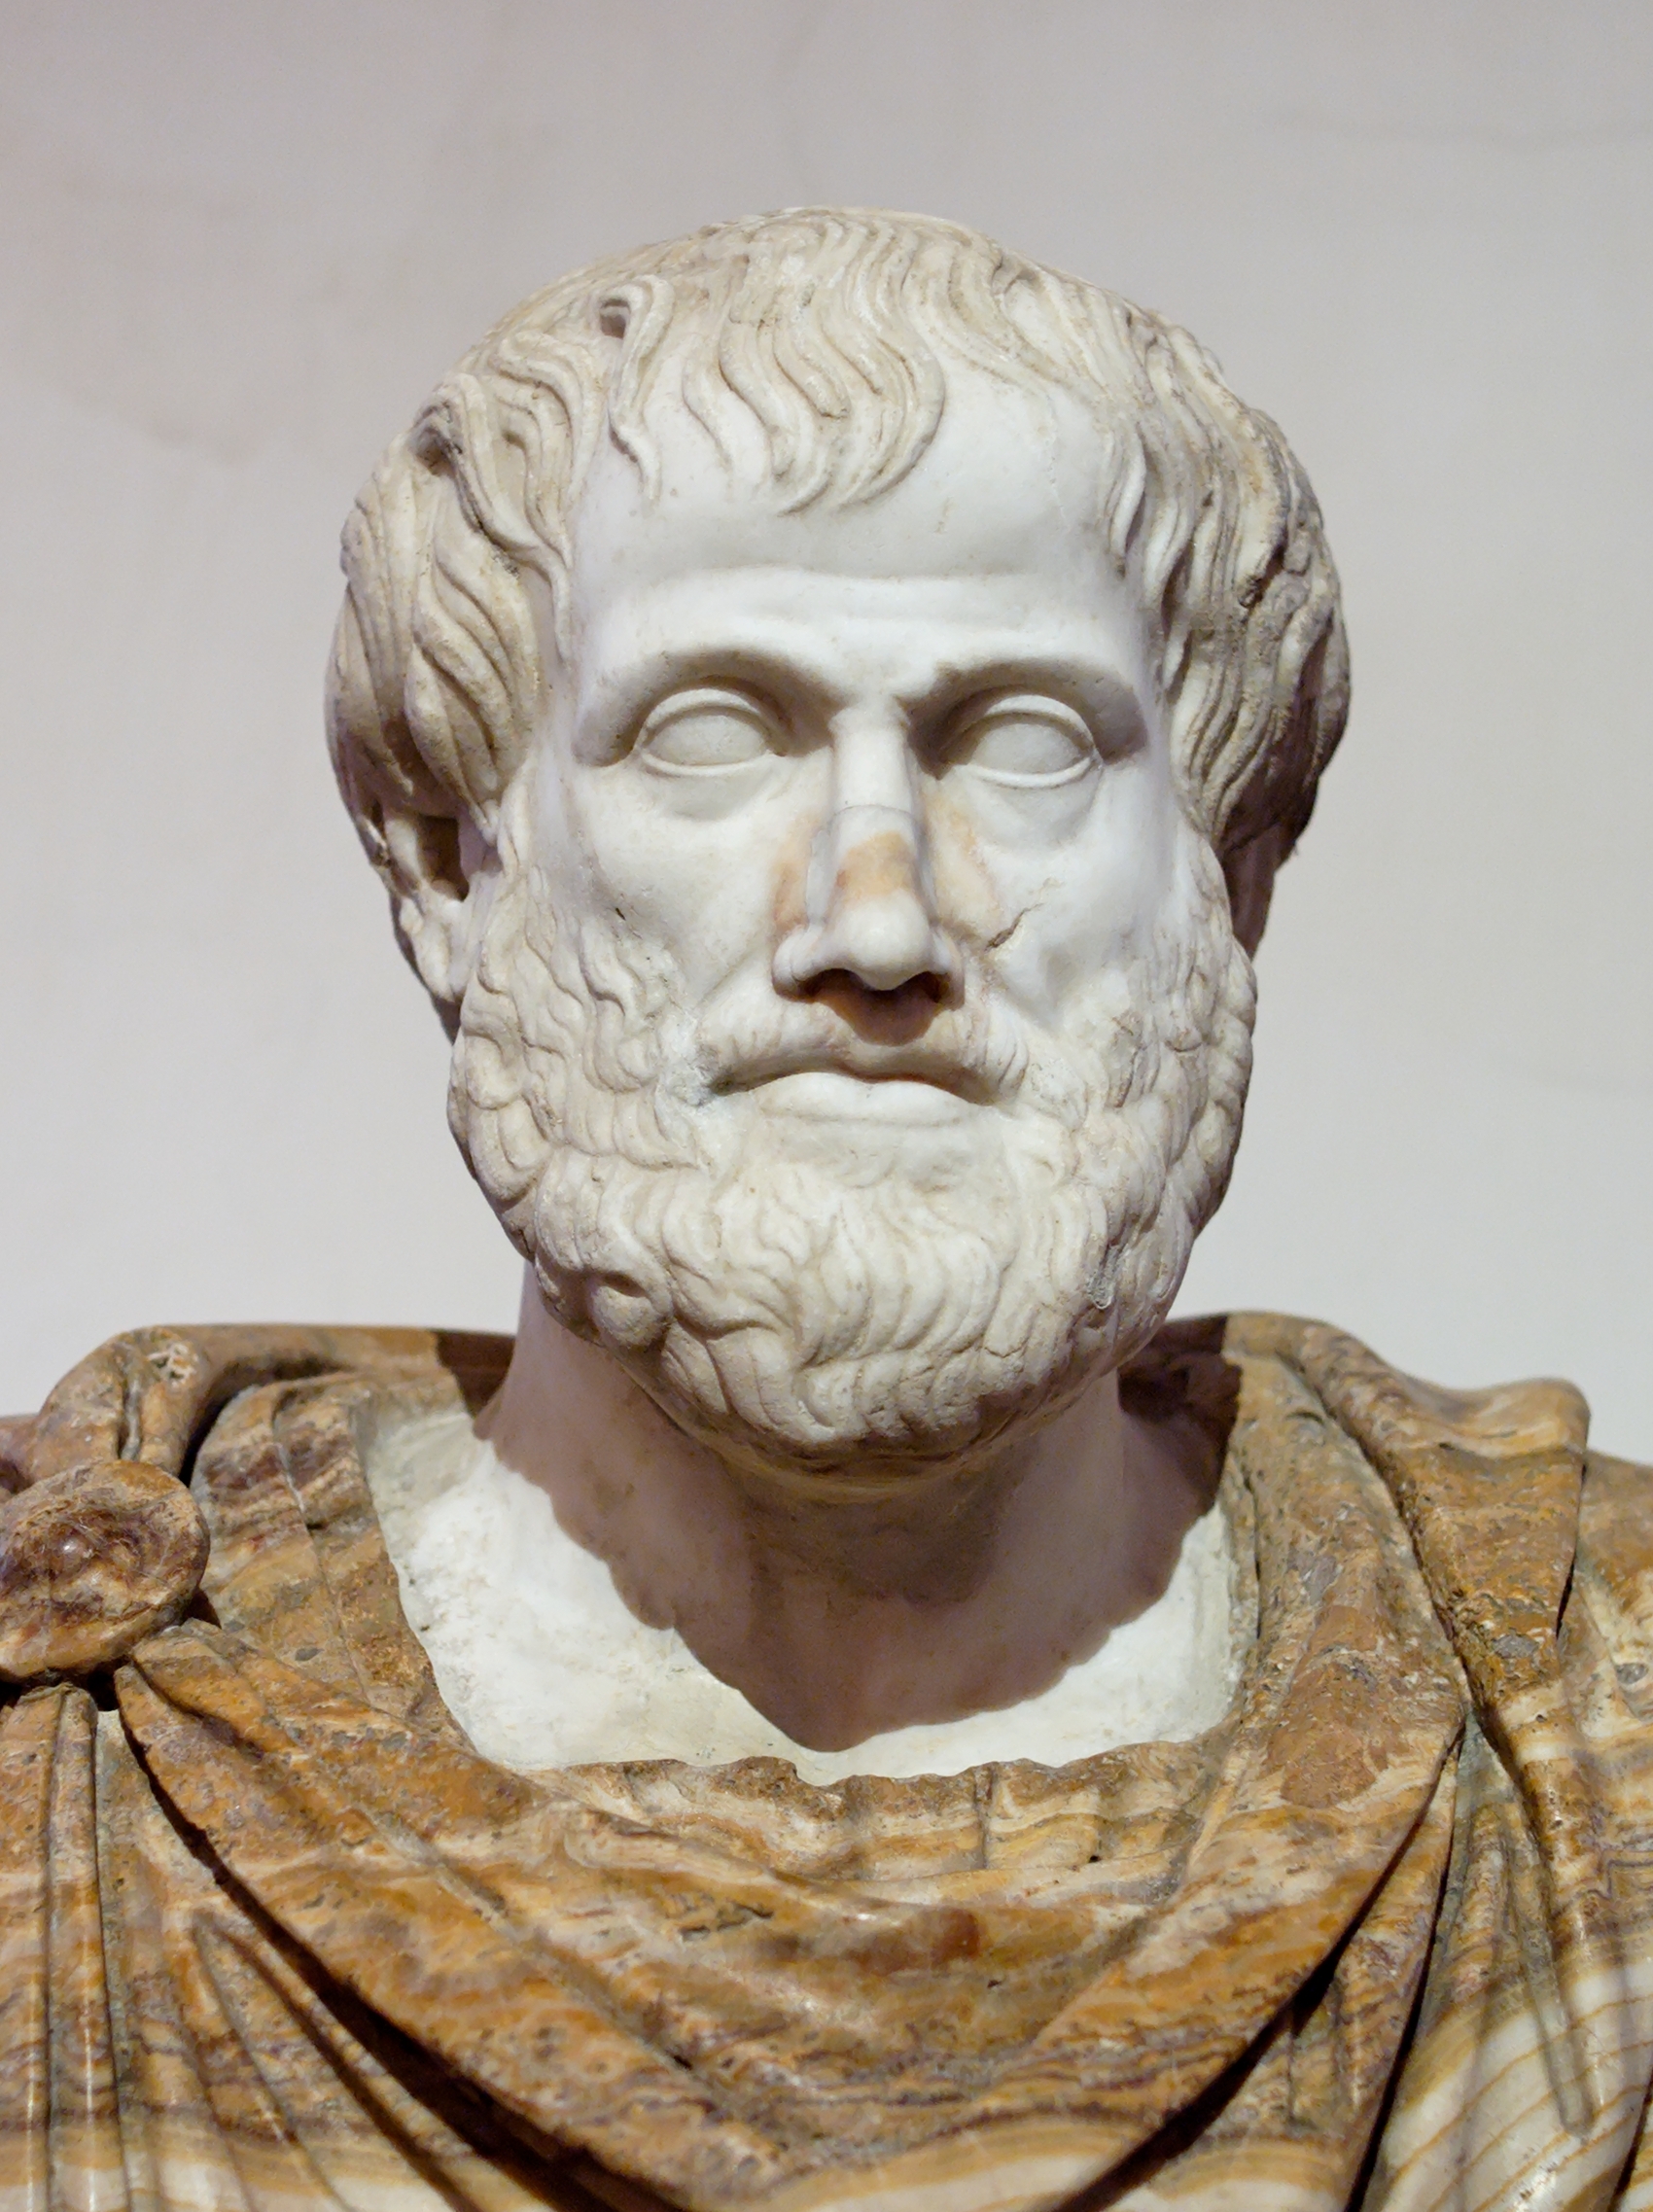 Marble sculpture of the bust of Aristotle